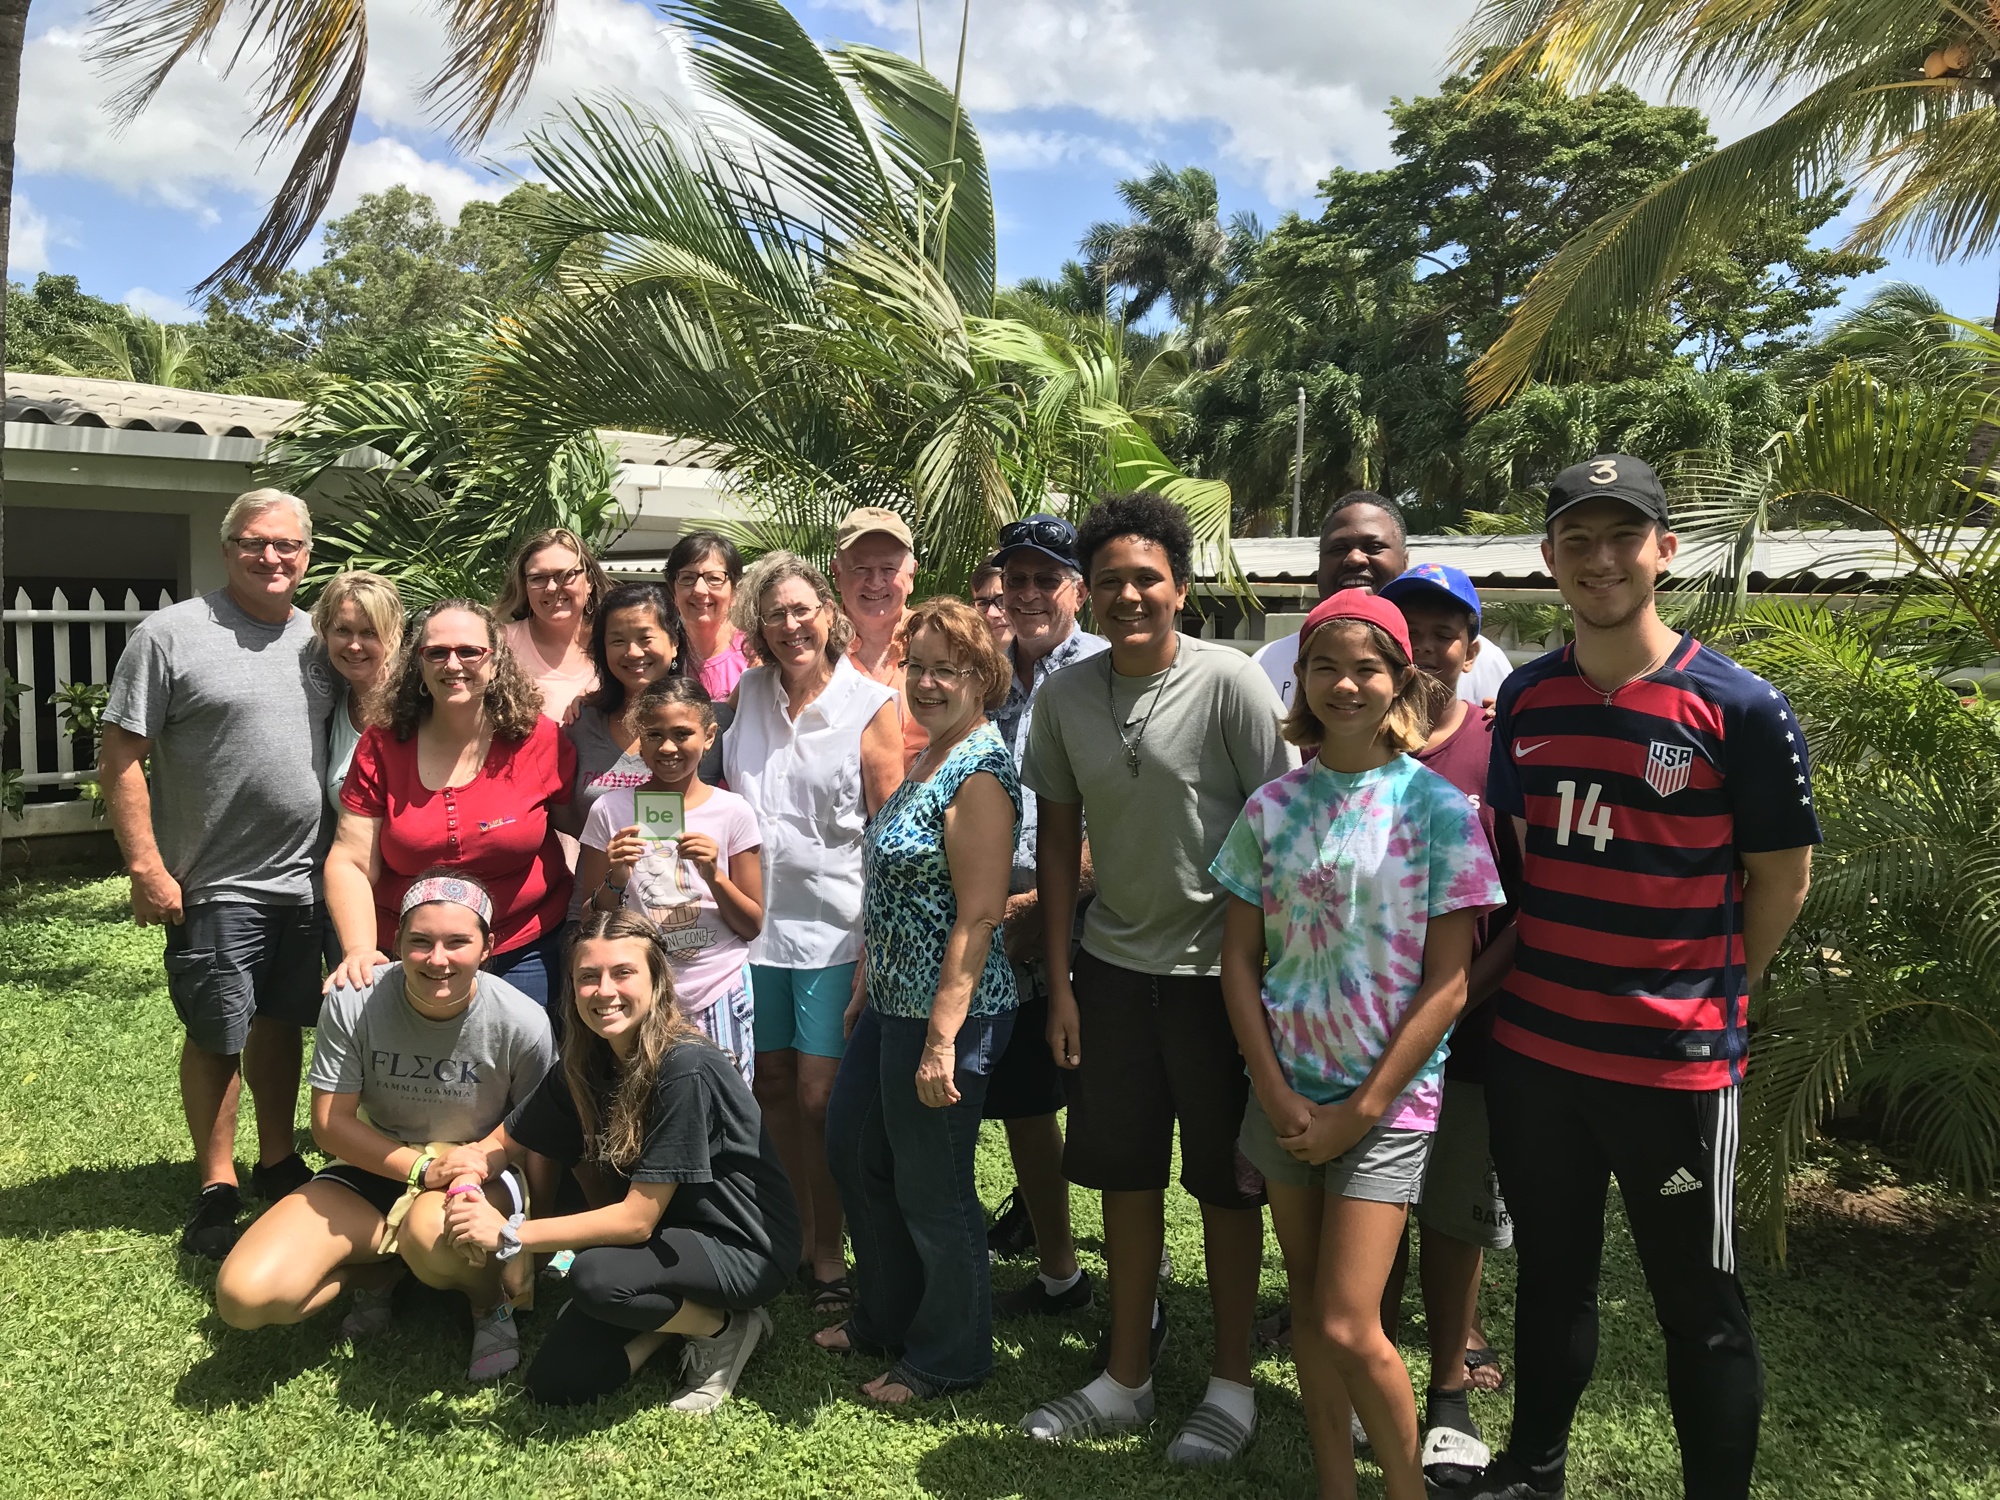 Ron and Kathy Marlow led a team of volunteers on a mission trip to Nicaragua.